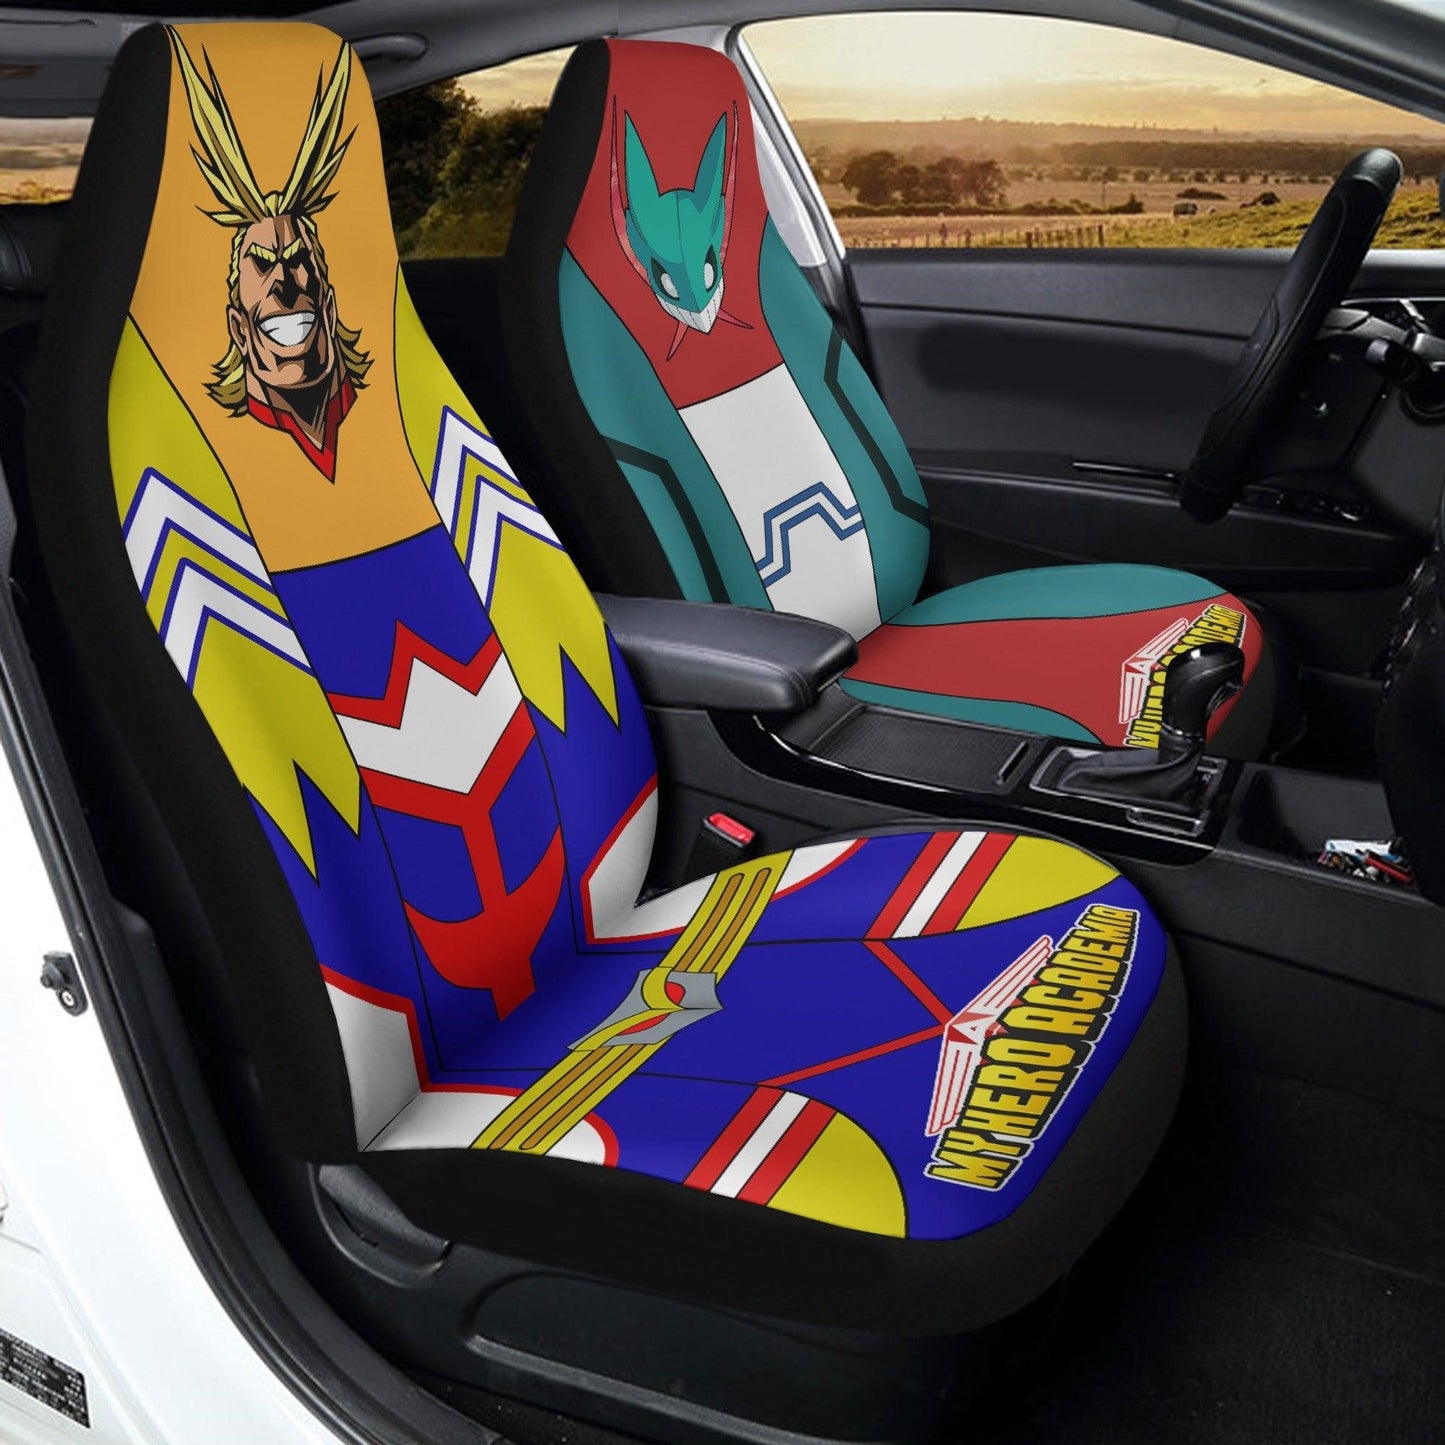 My Hero Academia Car Seat Covers Deku X All Might Character Seat Covers